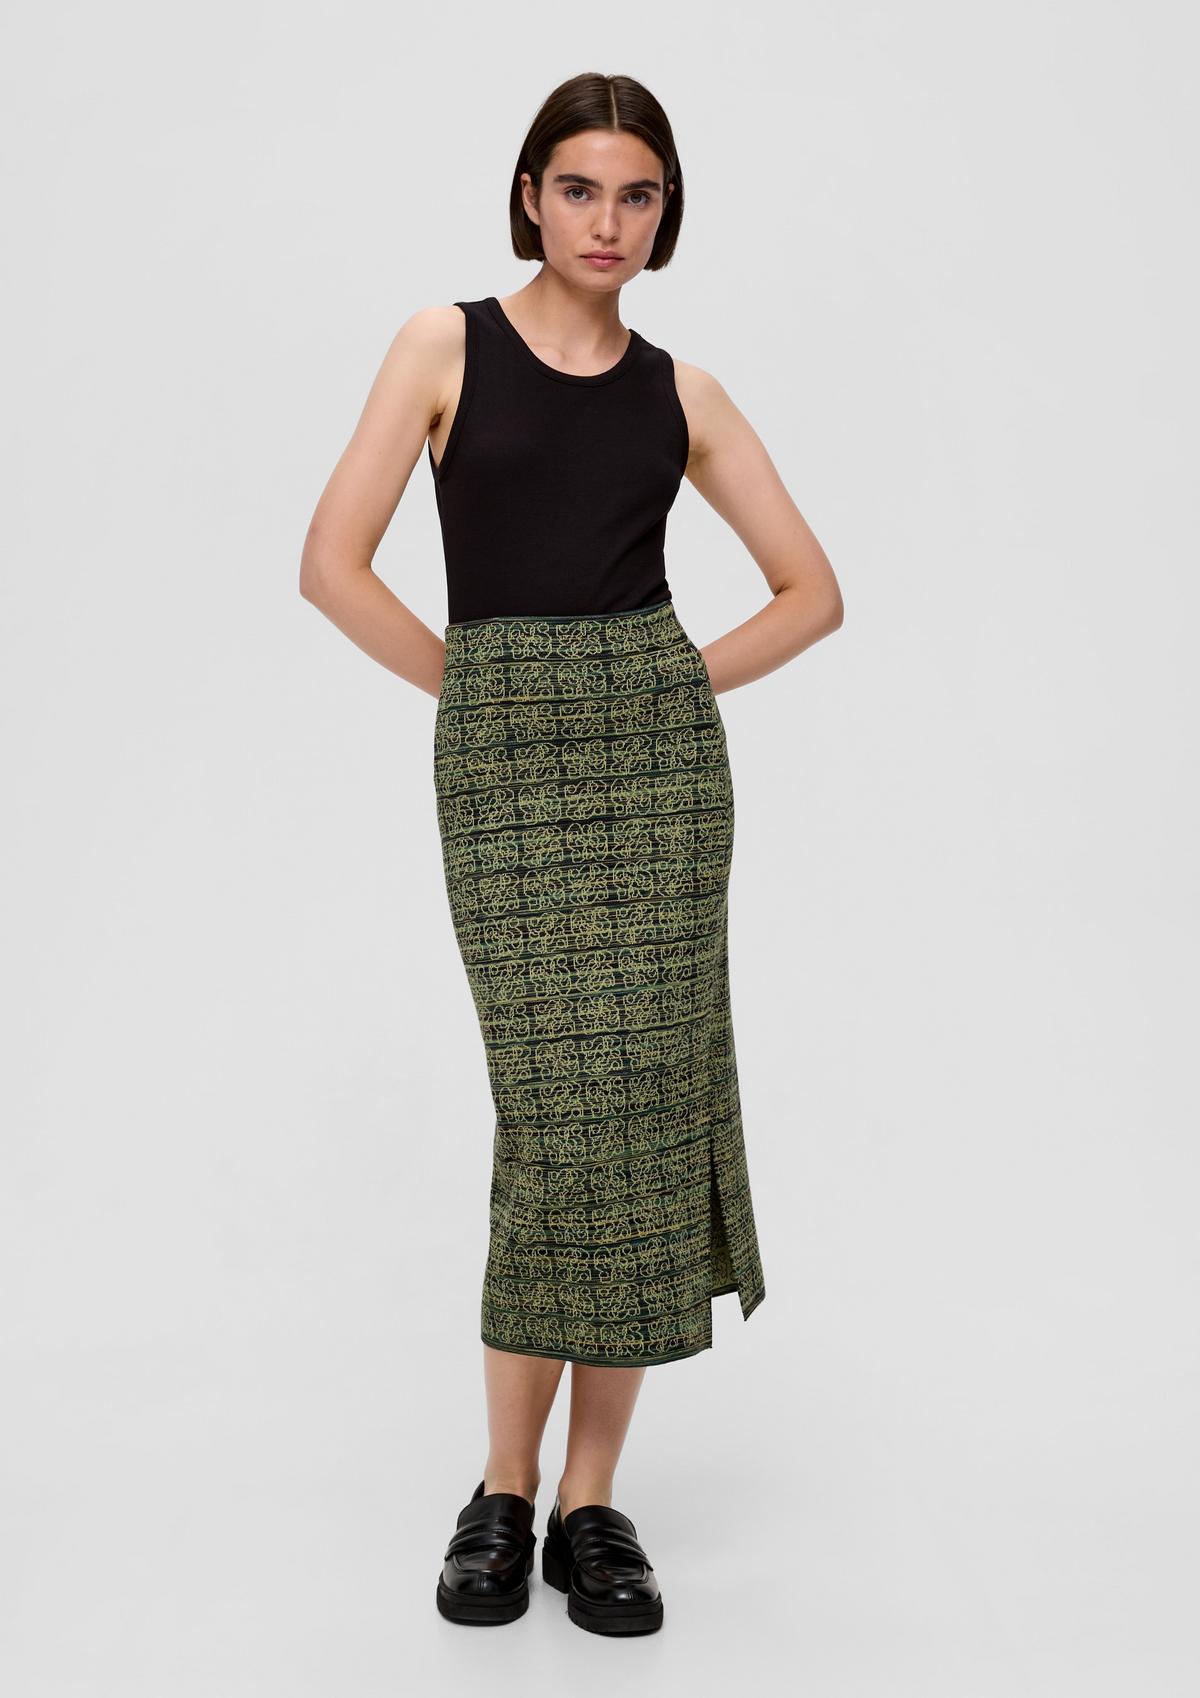 Skirt with a jacquard pattern